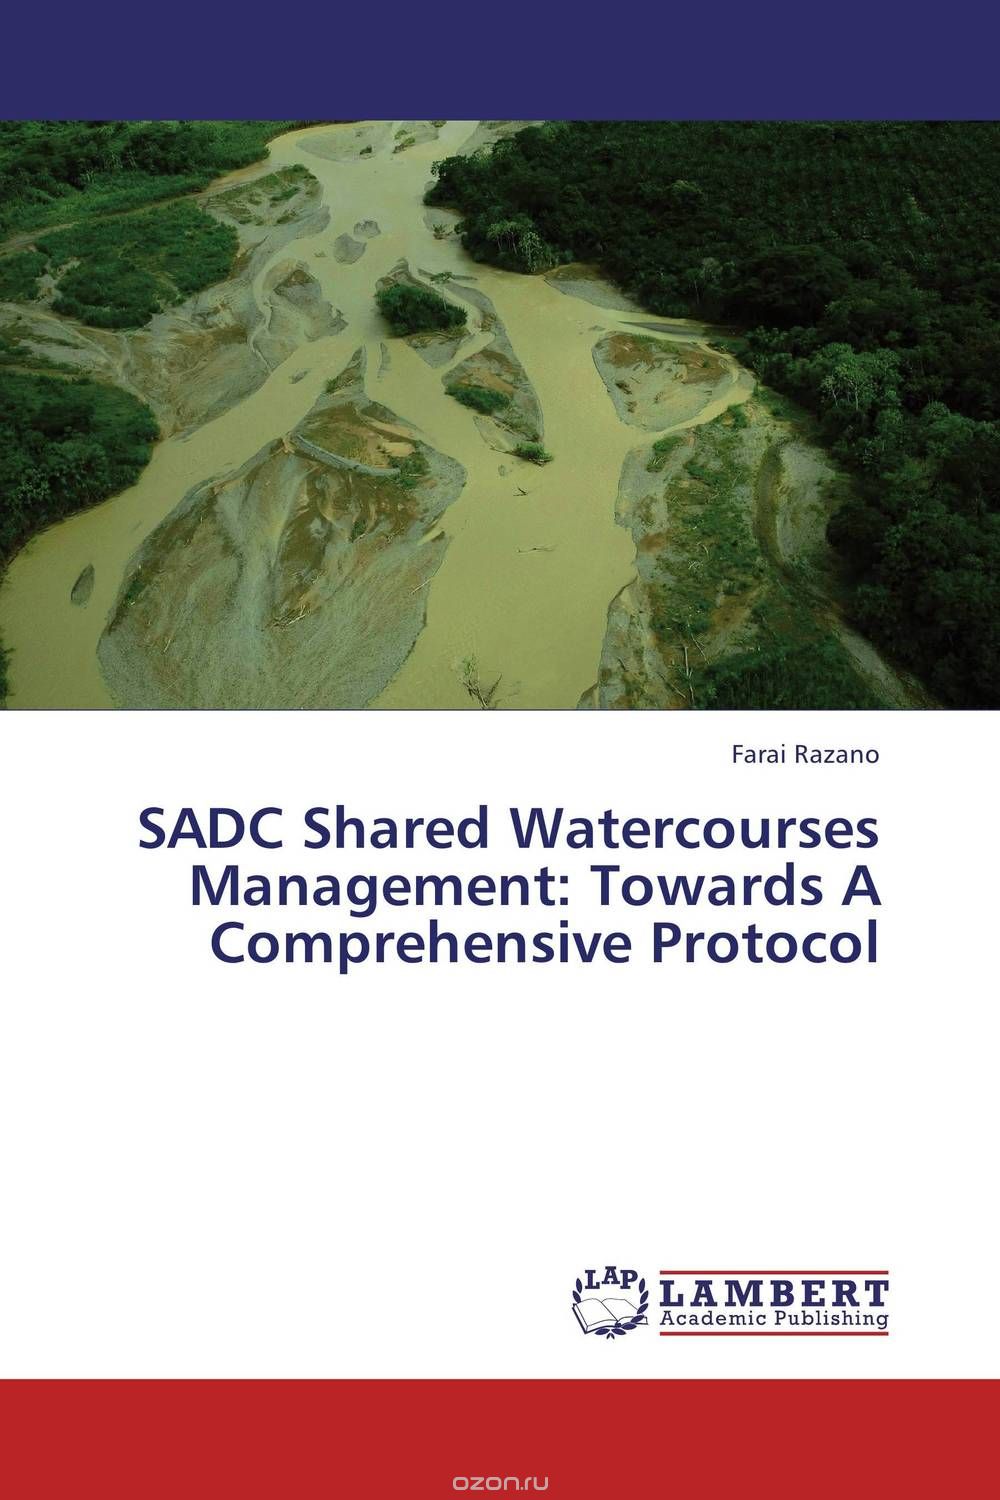 SADC Shared Watercourses Management: Towards A Comprehensive Protocol